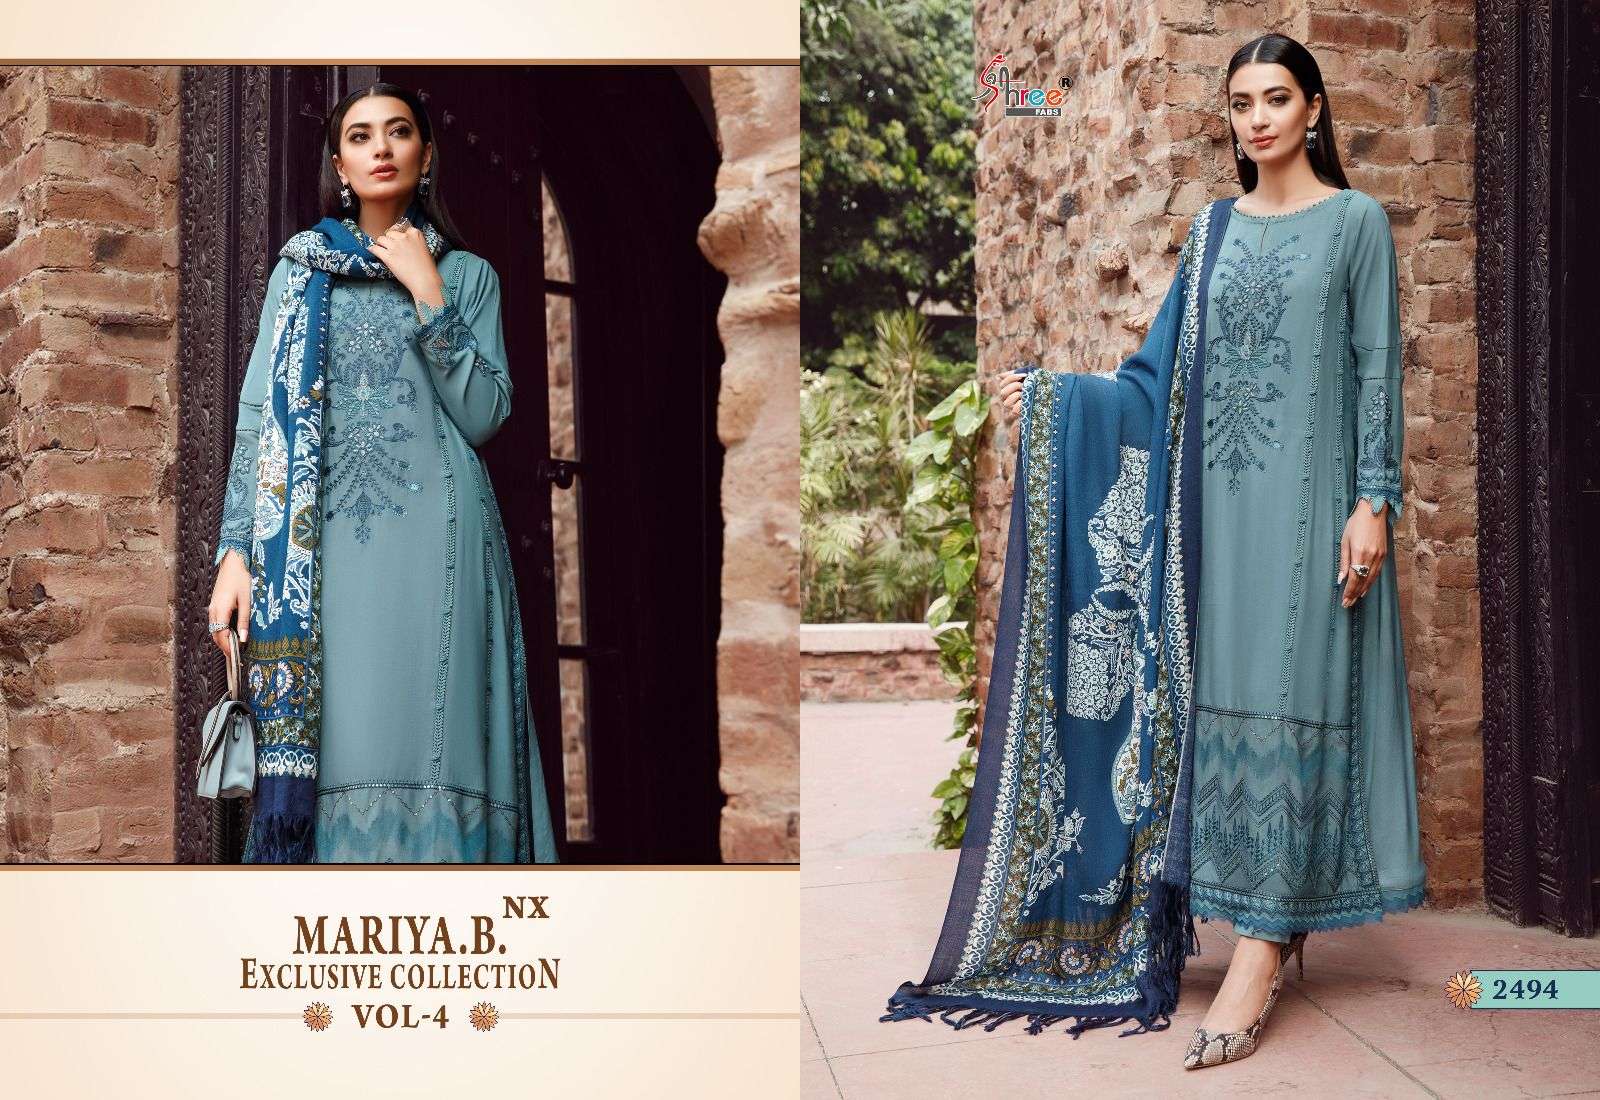 SHREE FABS MARIA B EXCLUSIVE COLLECTION VOL 4 NX